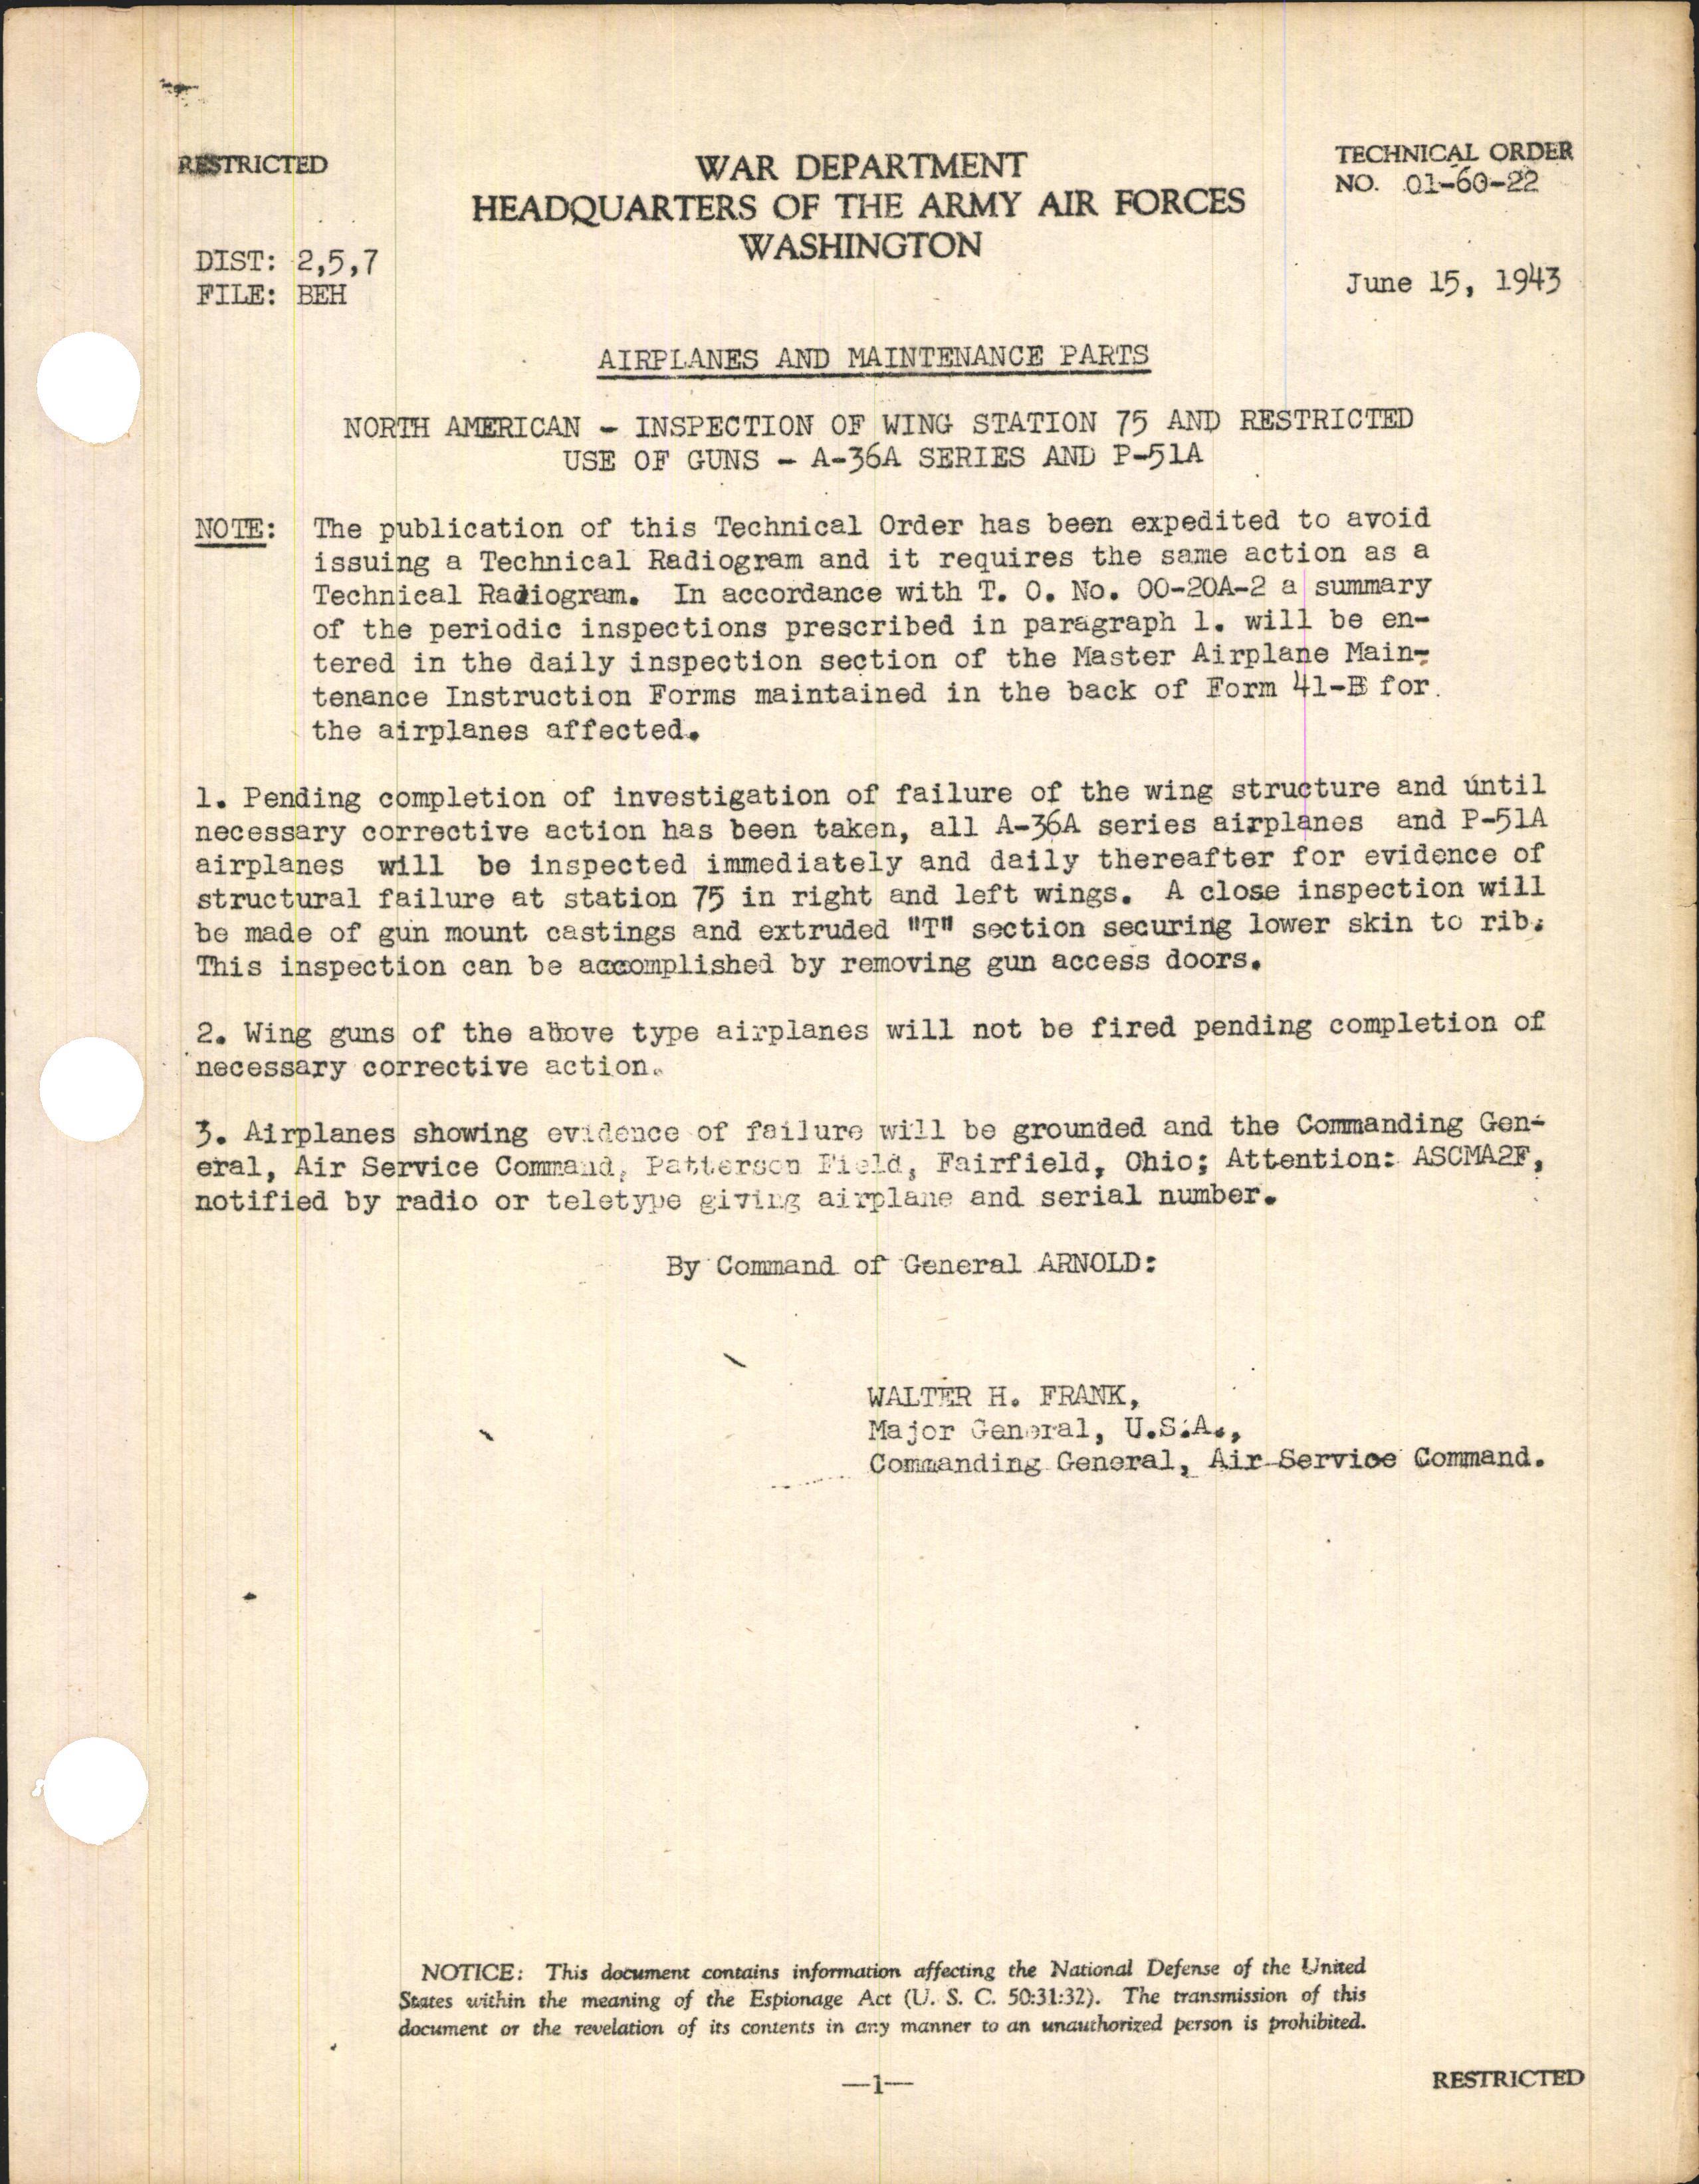 Sample page 1 from AirCorps Library document: Inspection of Wing Station 75 and Restricted Use of Guns for A-36A and P-51A Series